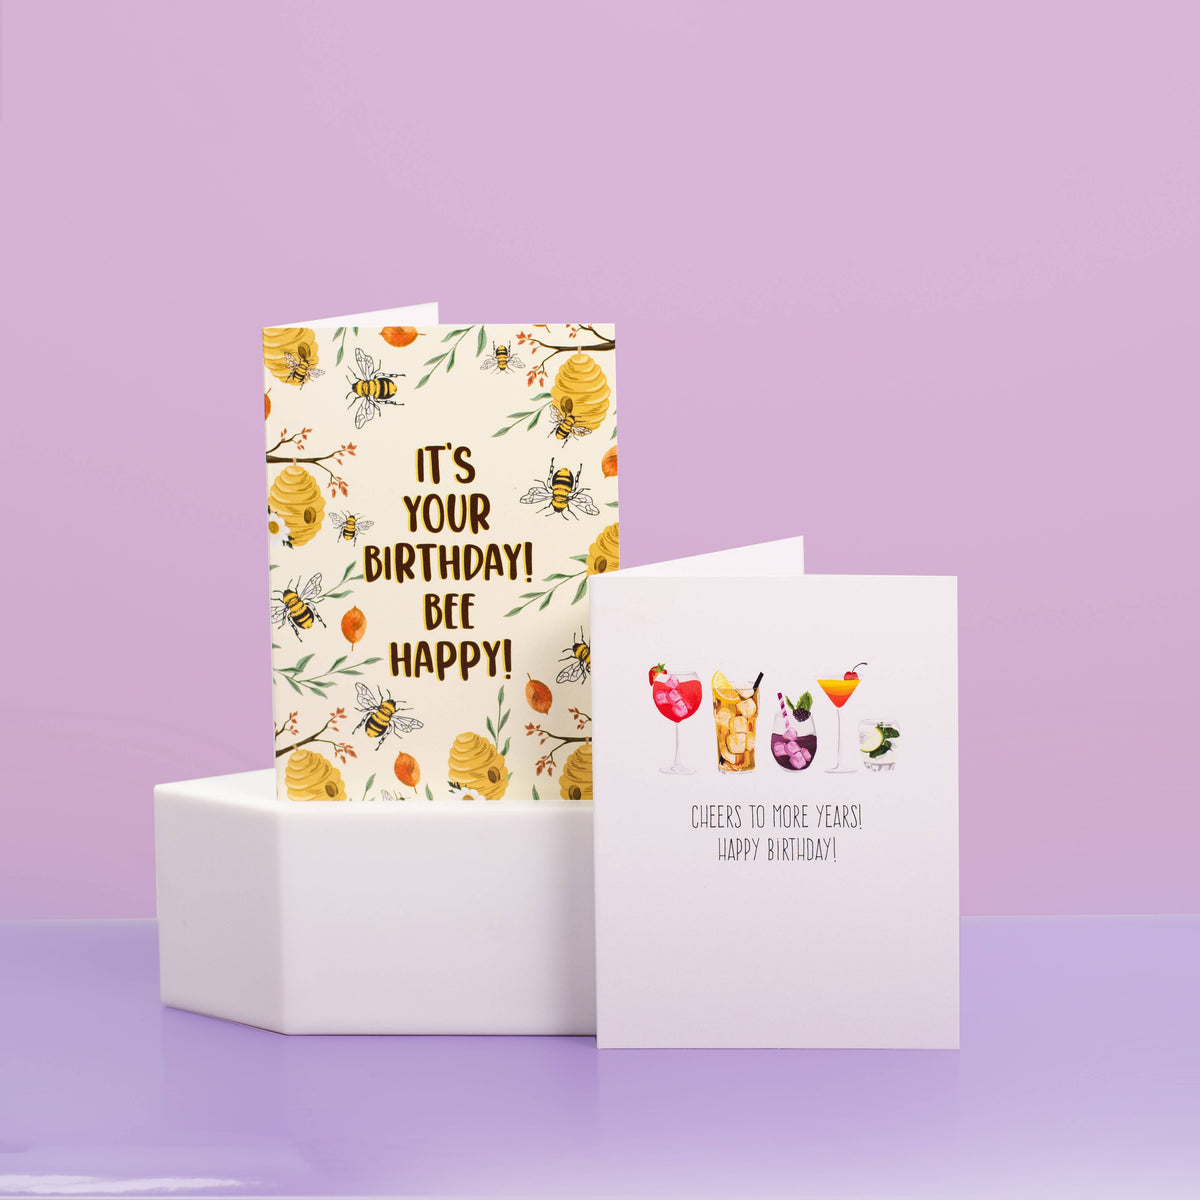 Cheers To More Years! Happy Birthday!  - Greeting Card